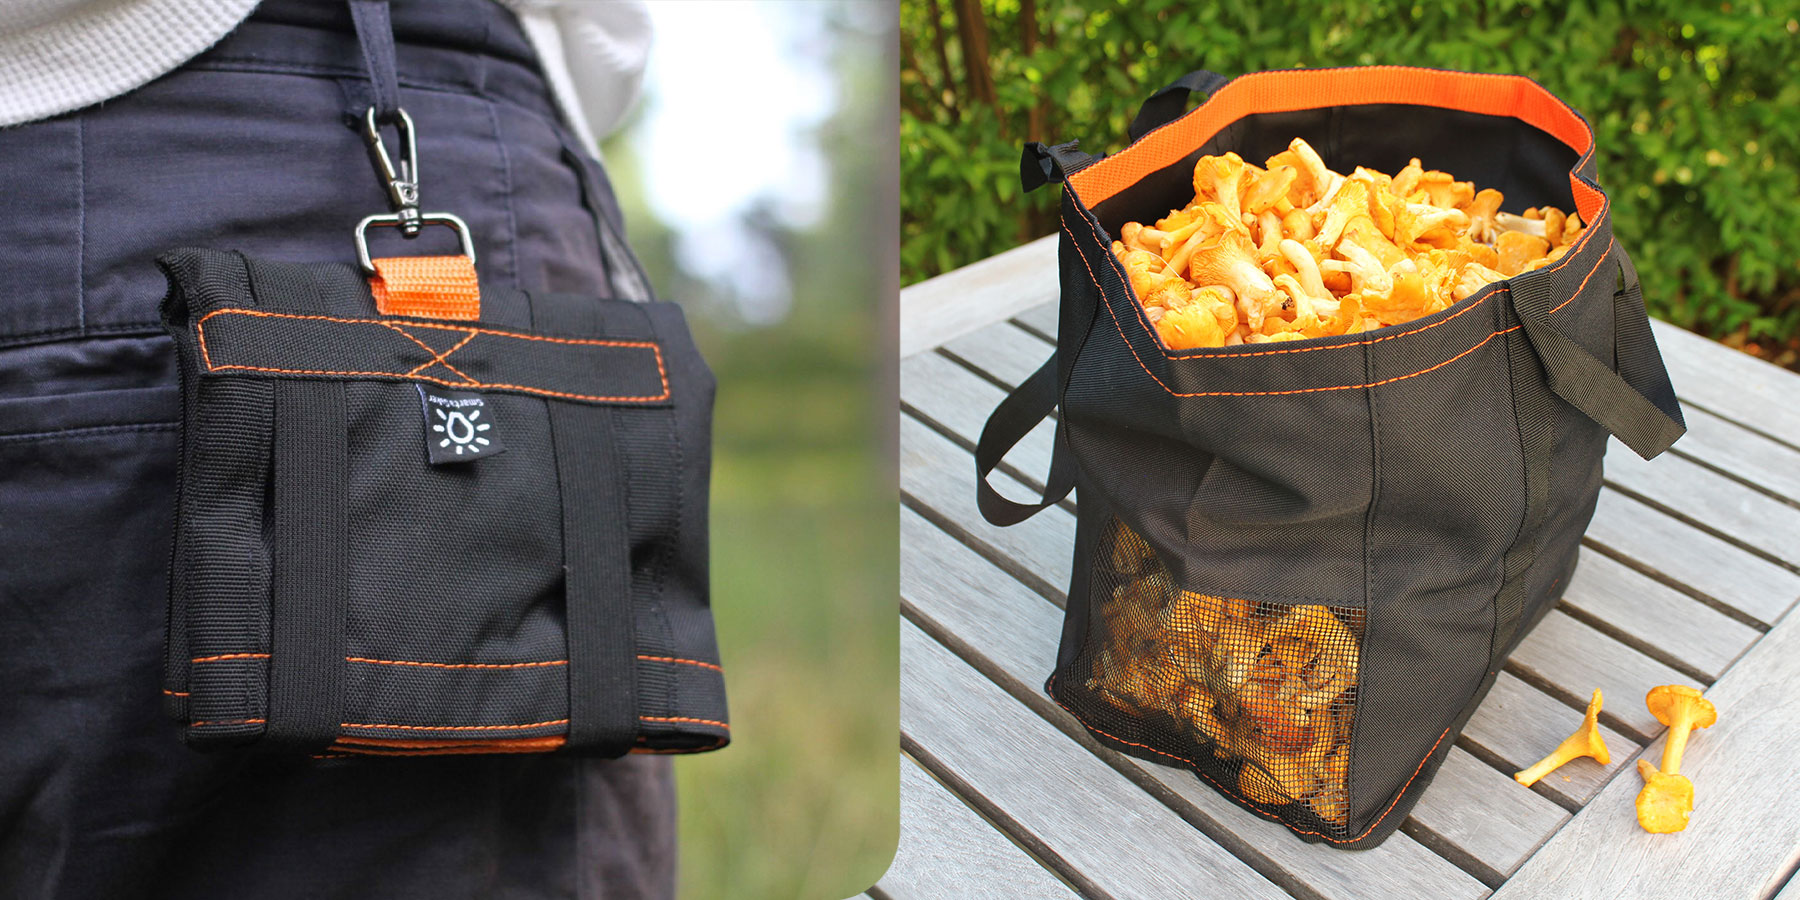 Product of the month: Mushroom bag